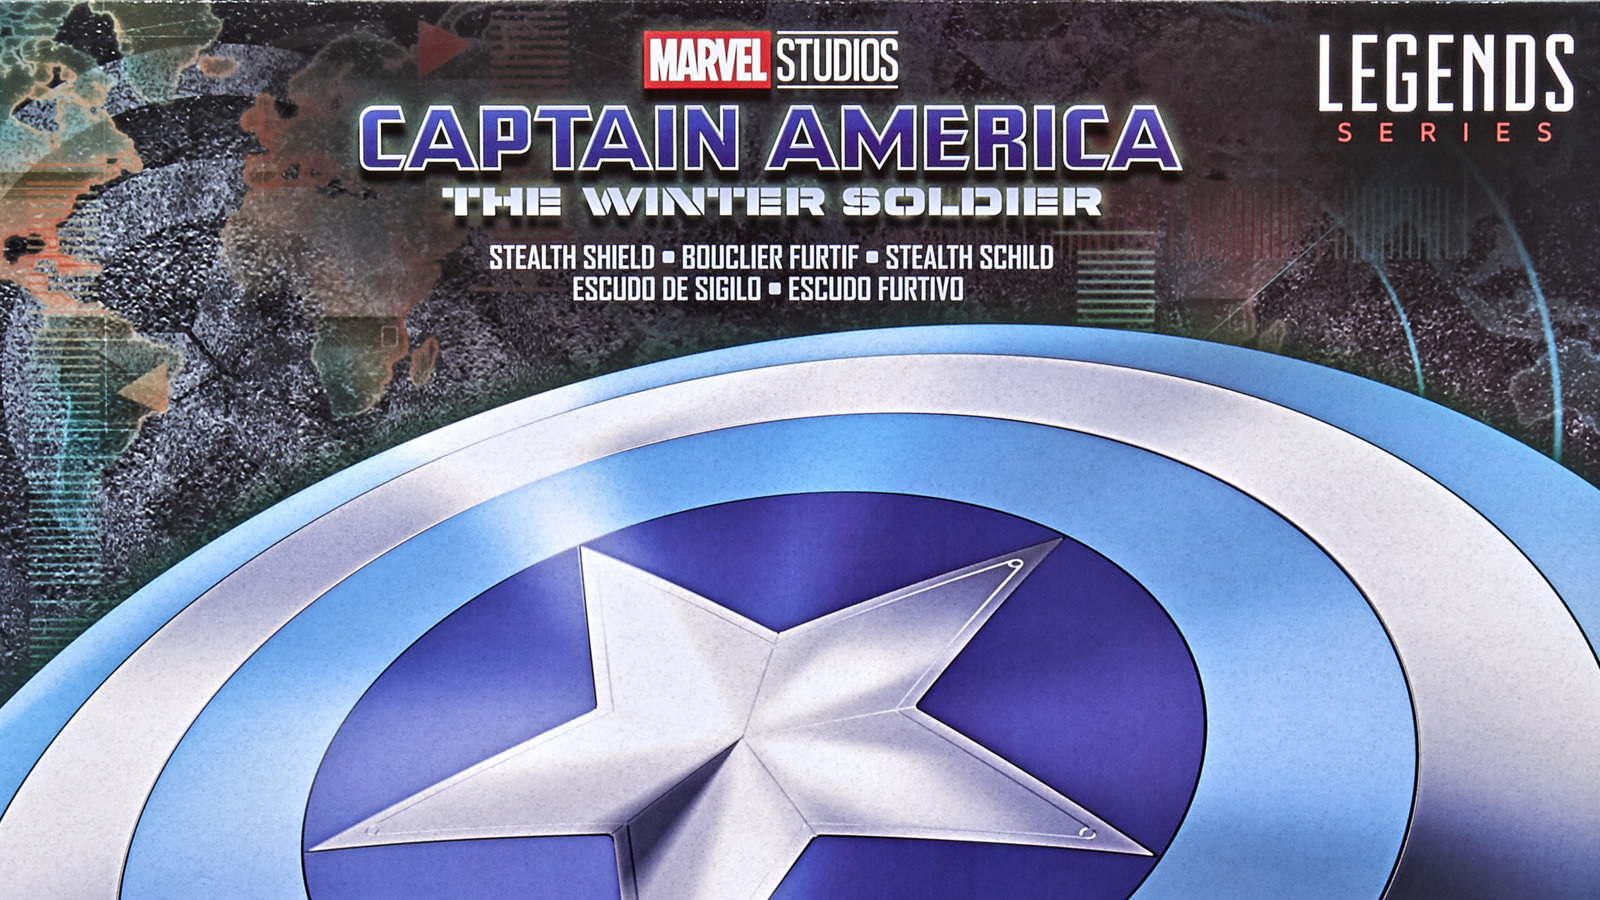 Marvel, the legendary shield from Captain America: The Winter Soldier is at a crazy price on Amazon